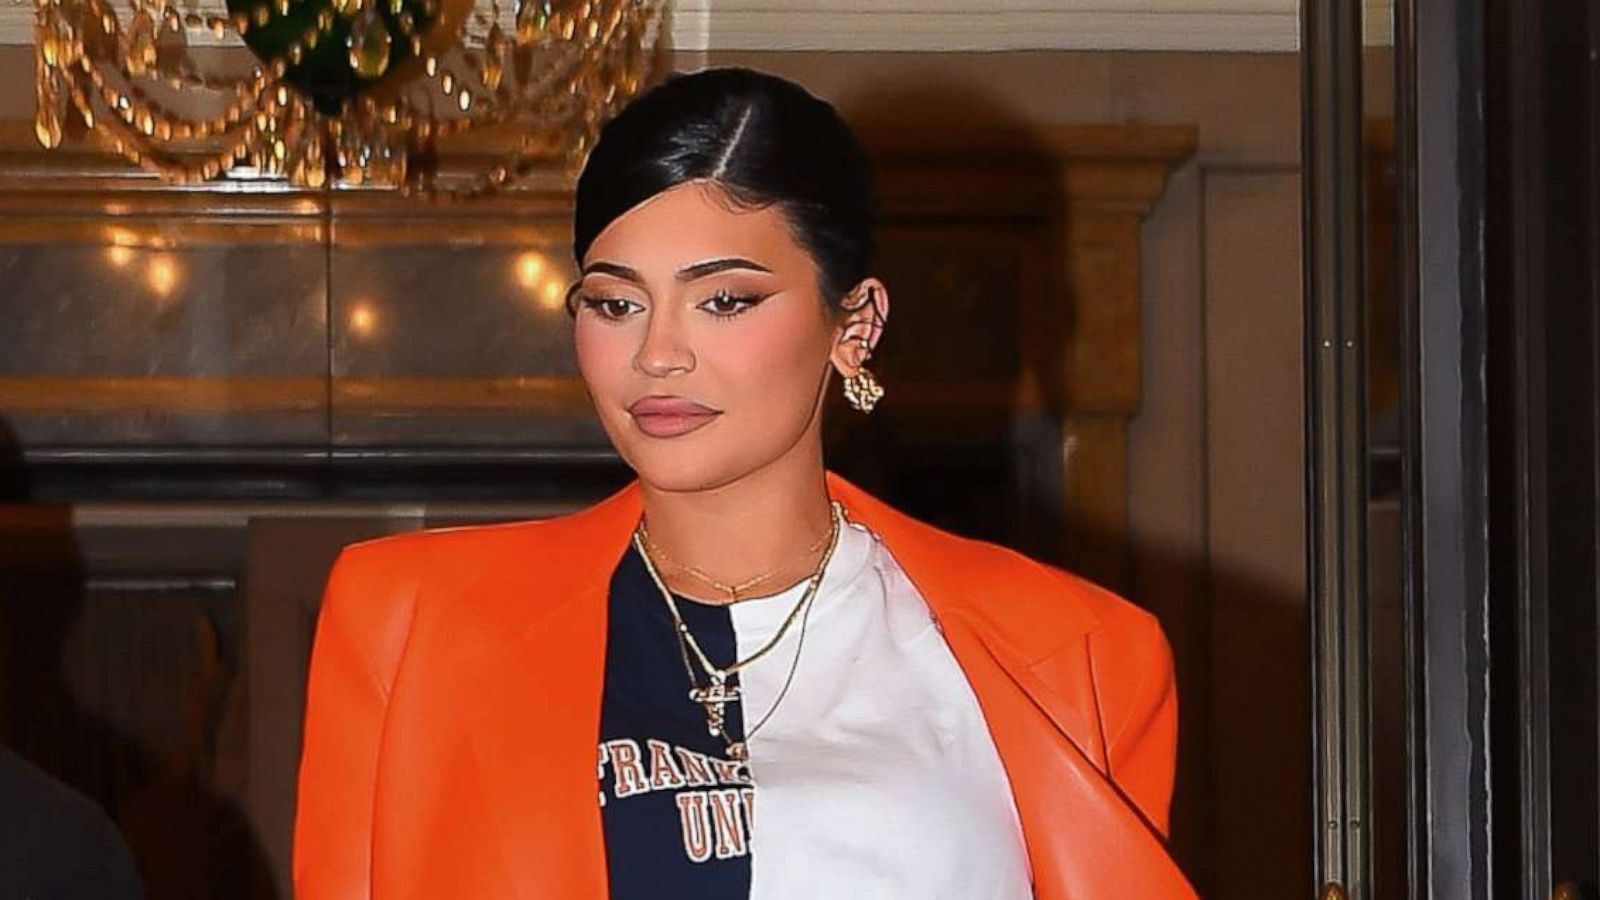 Kylie Jenner in Louis Vuitton fluffy slippers? Lounge around at home